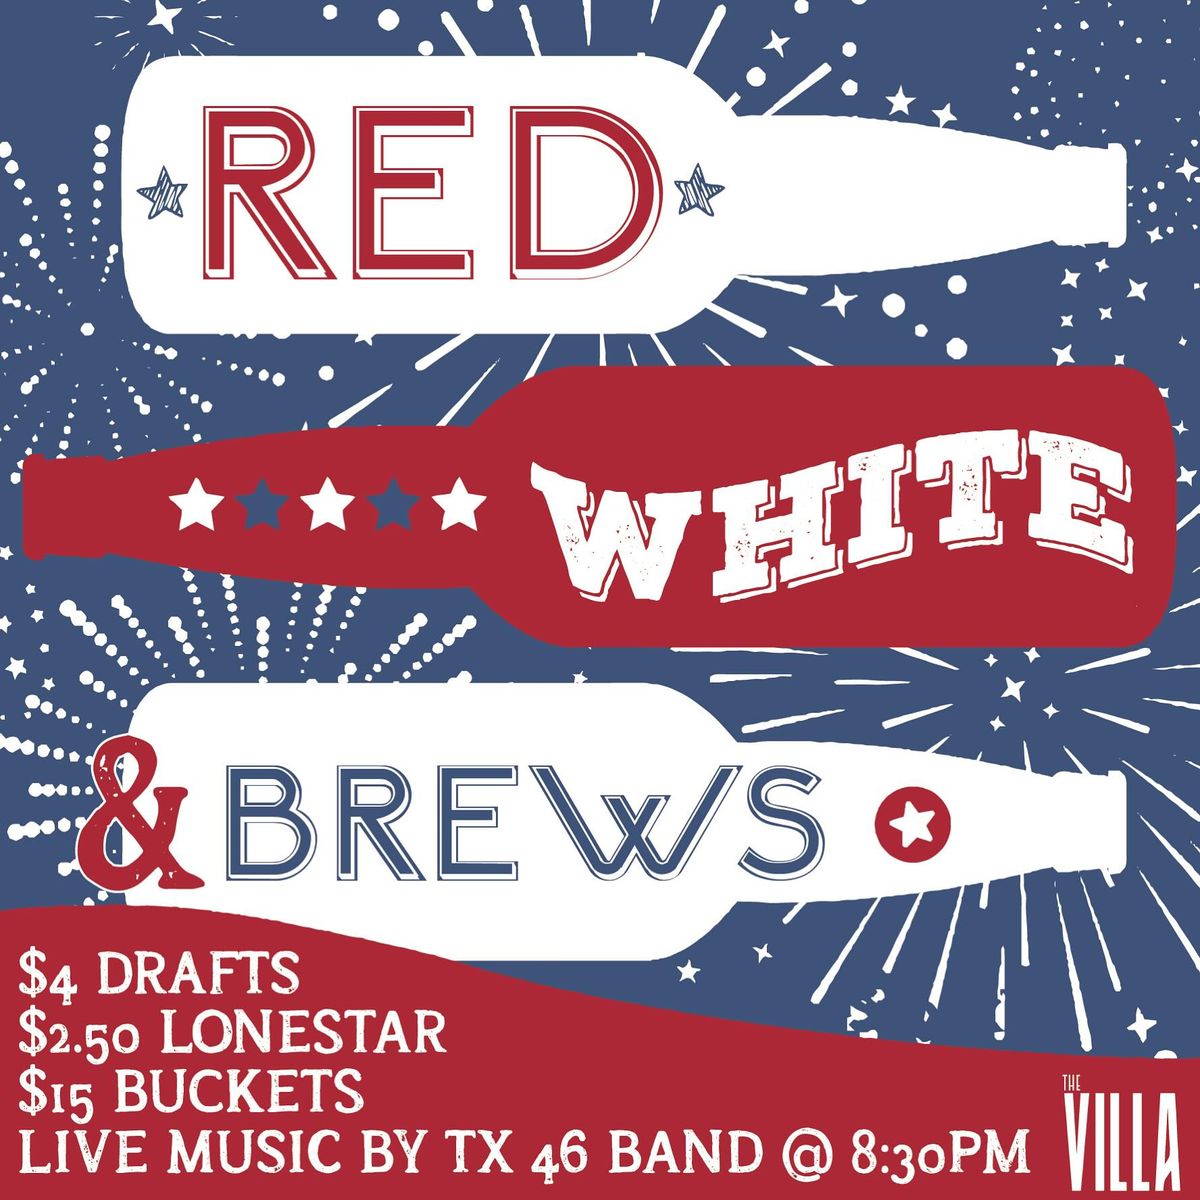 RED, WHITE & BREWS AT THE VILLA!